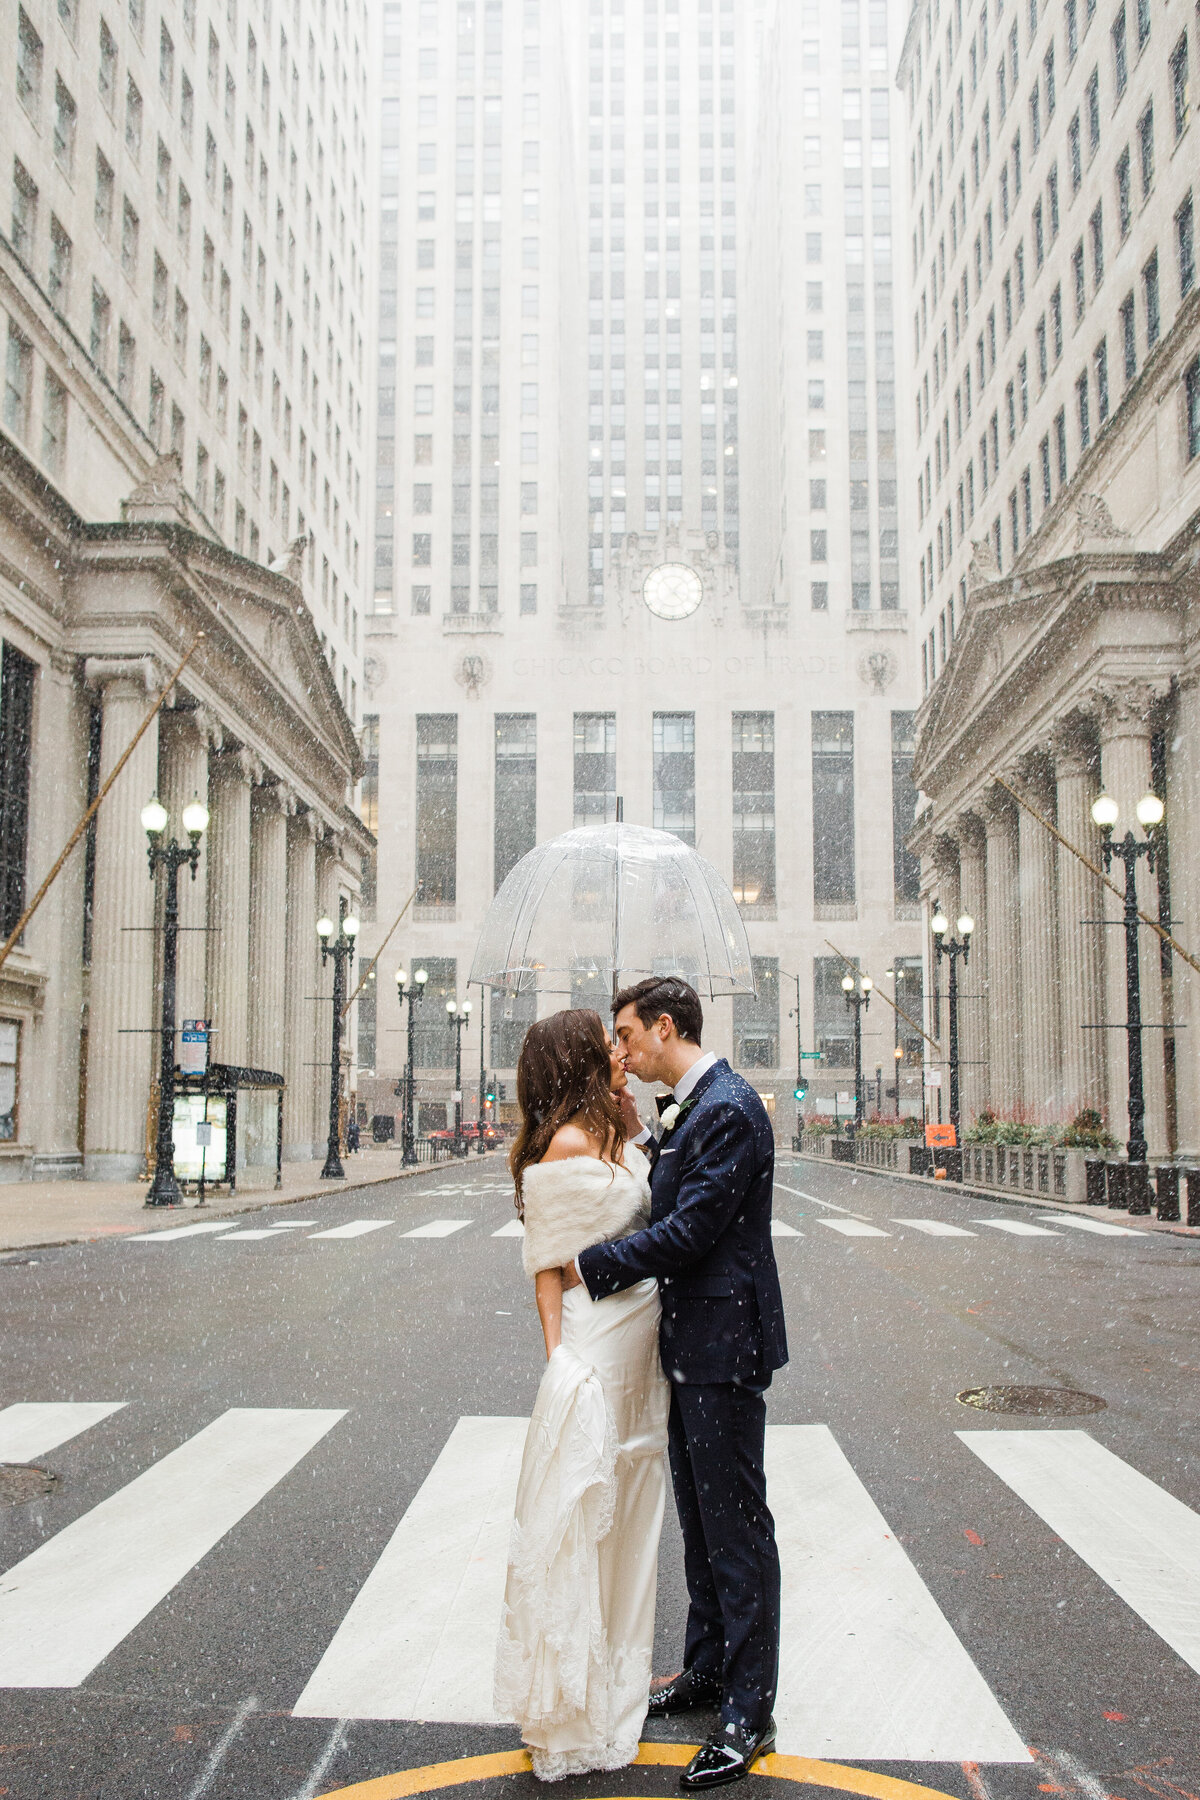 A Chicago wedding photographer captures a couple in the middle of a downtown street during a snow storm